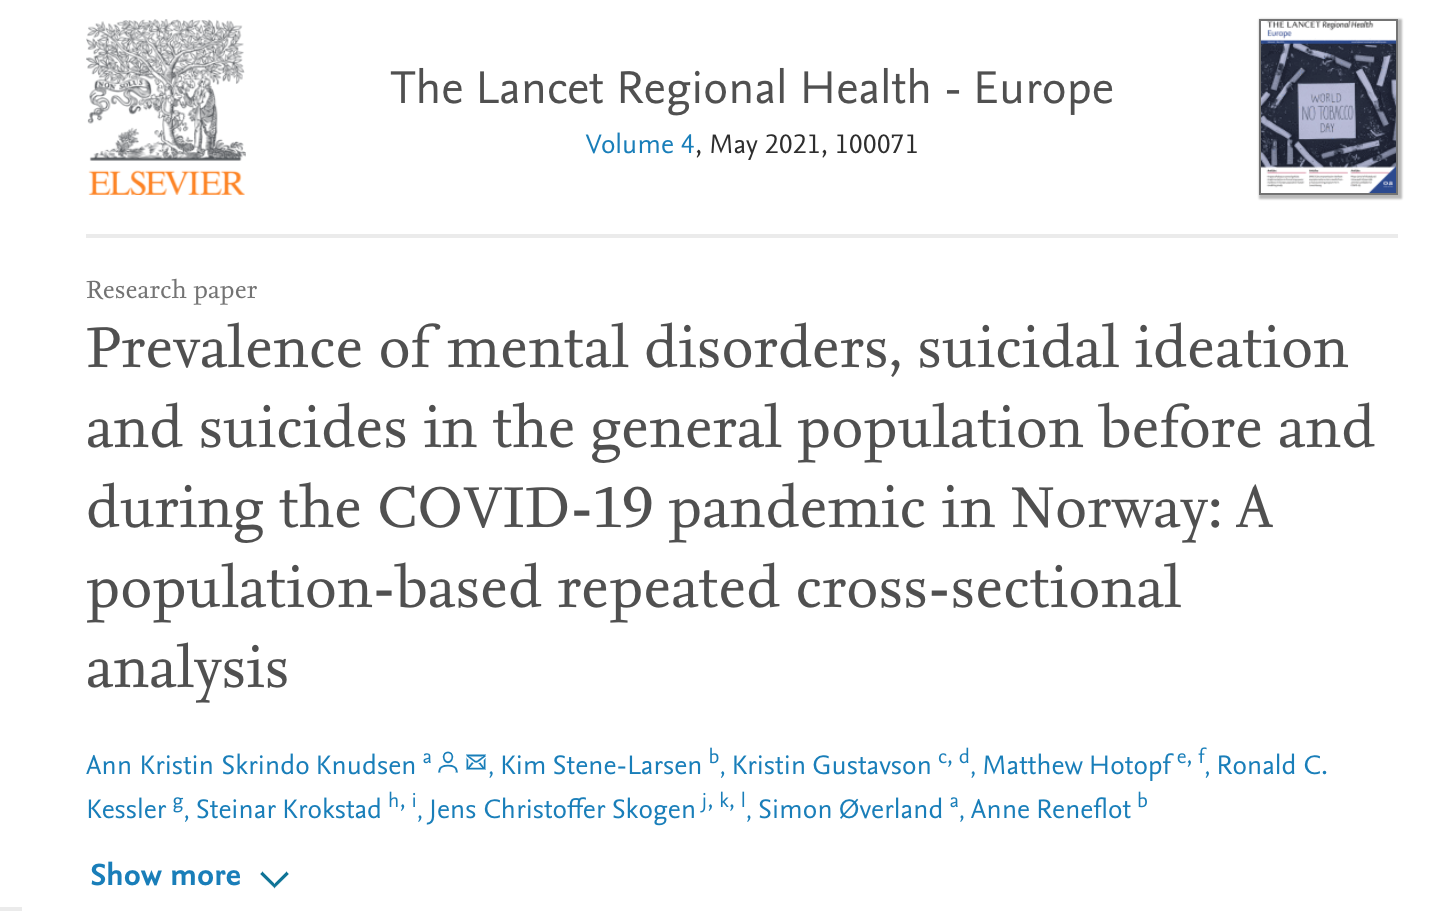 Prevalence of mental disorders suicidal ideation and suicide in the general population before and during the COVID19 pandemic in Norway